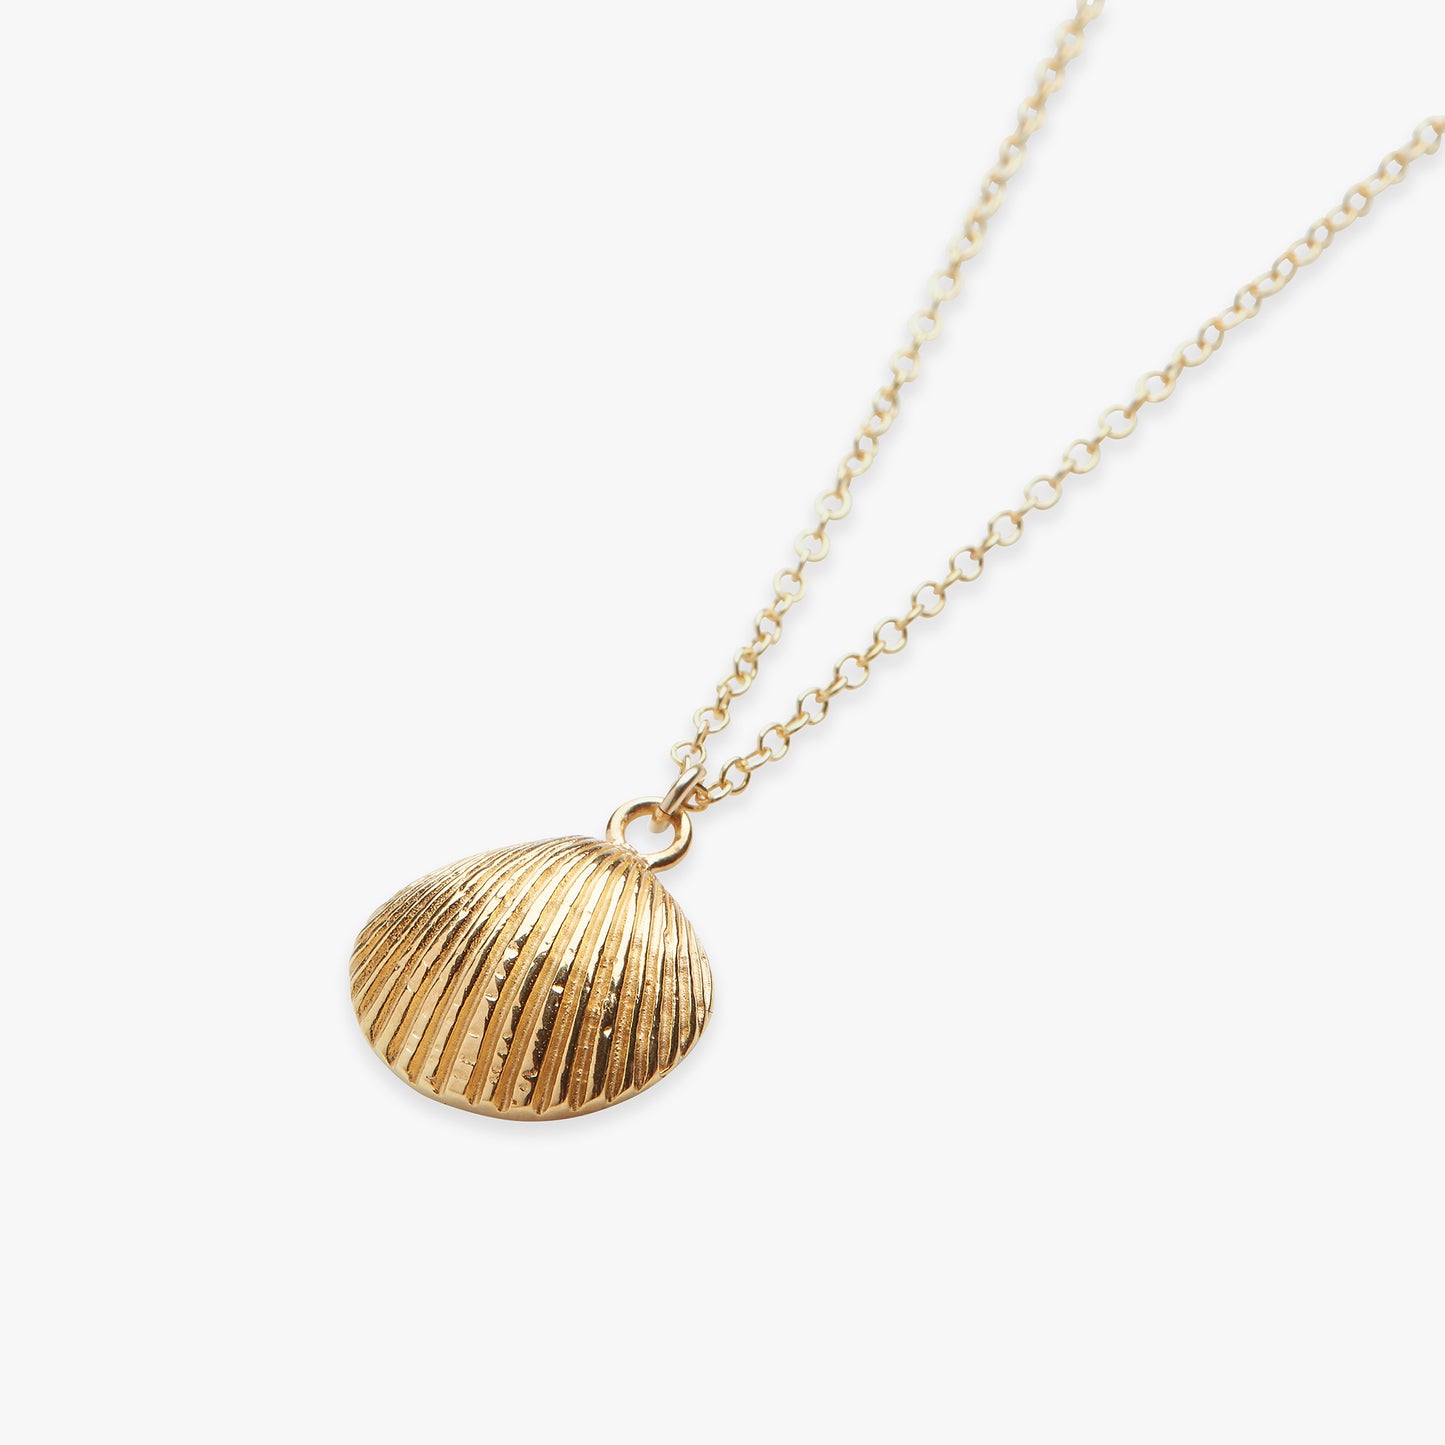 Laad afbeelding in Galerijviewer, Cockle Shell ketting gold filled
